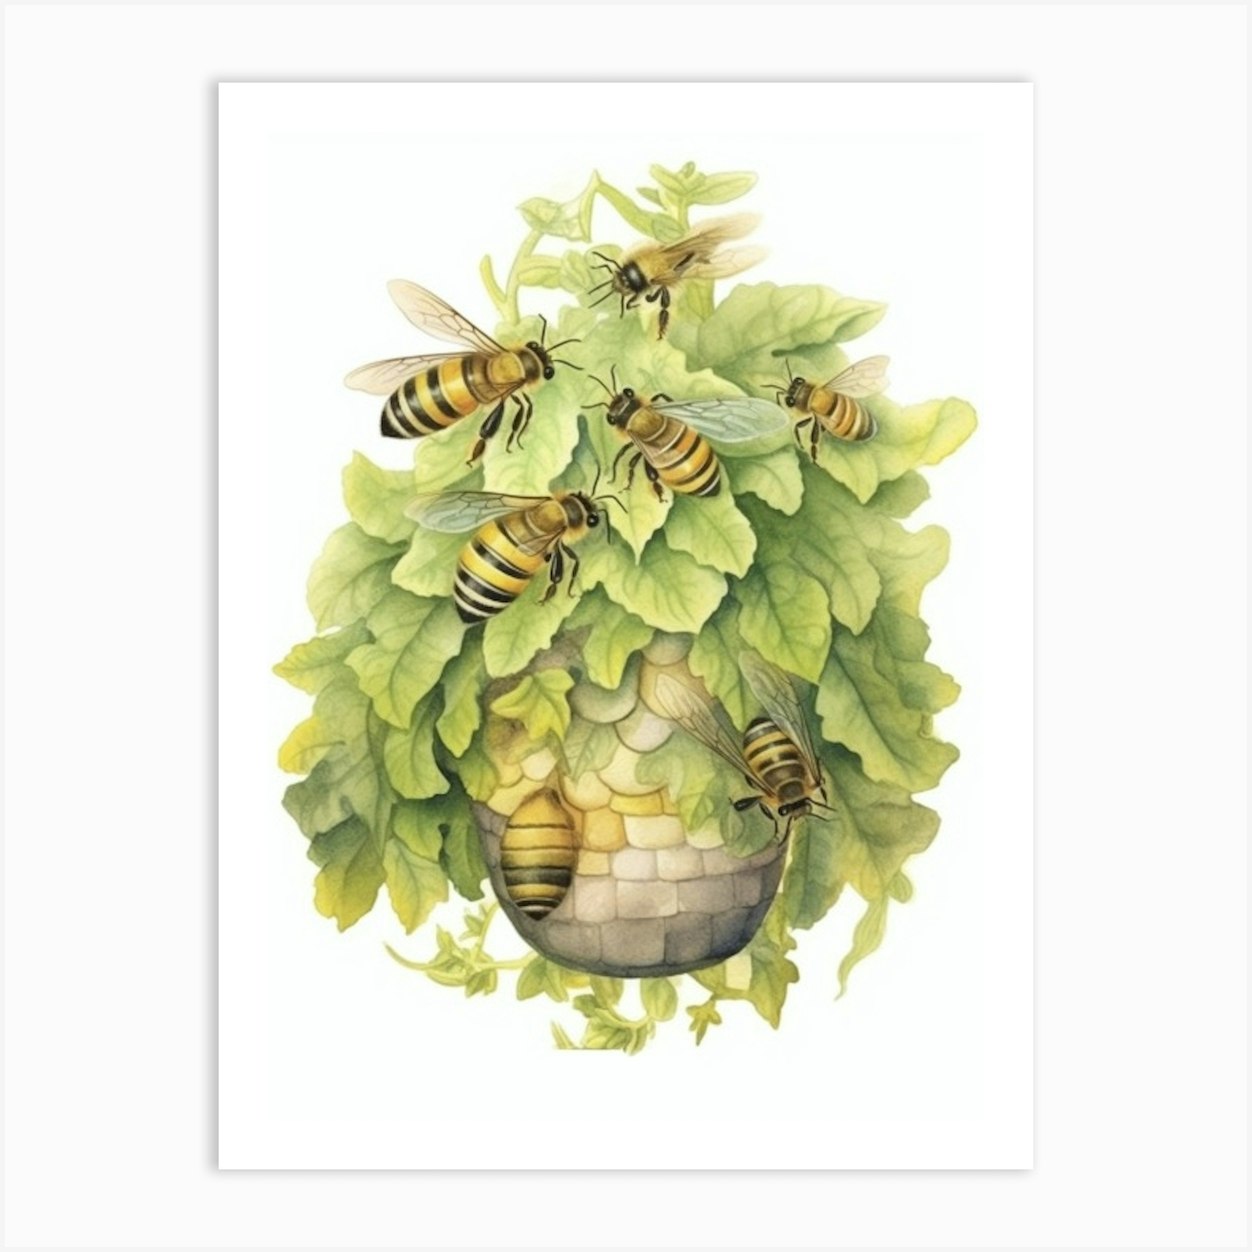 Digger Bee Beehive Watercolour Illustration 4 Art Print by Flora